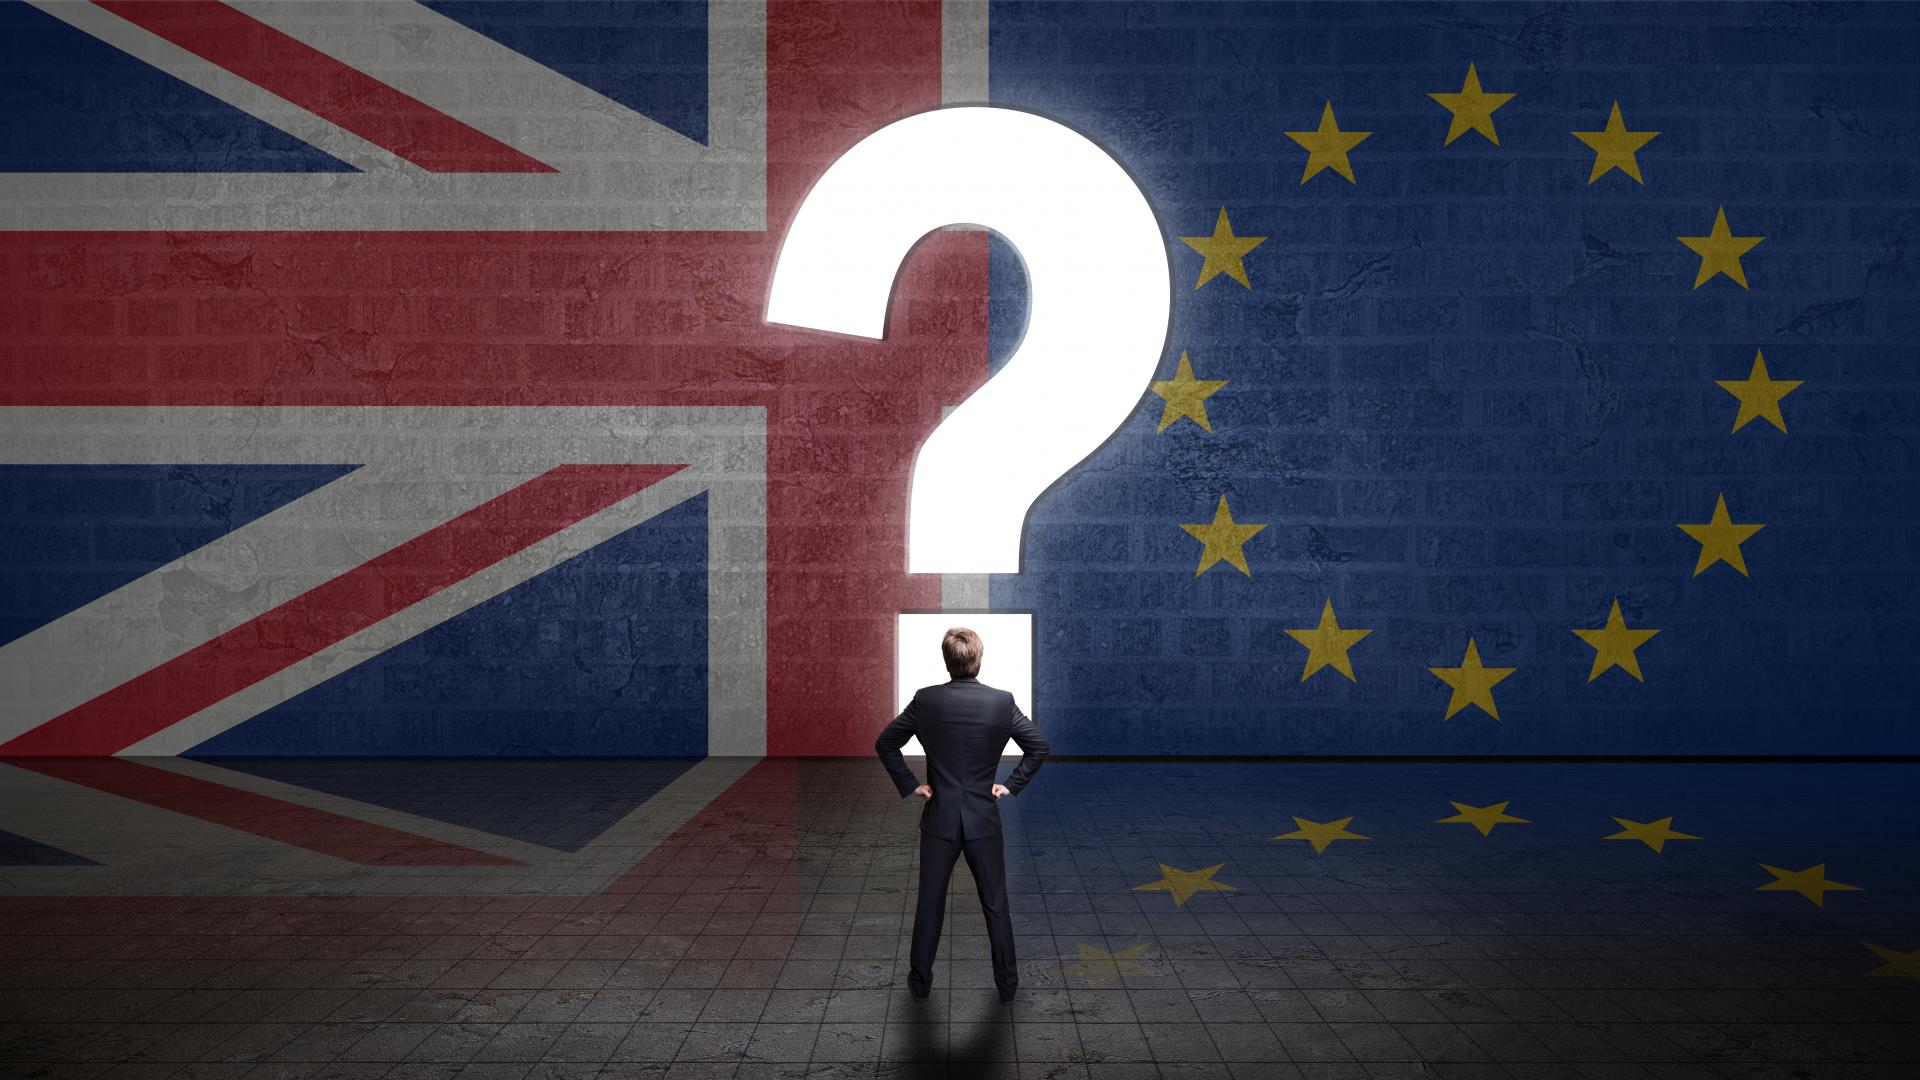 Should you buy, sell or trade up before Brexit?